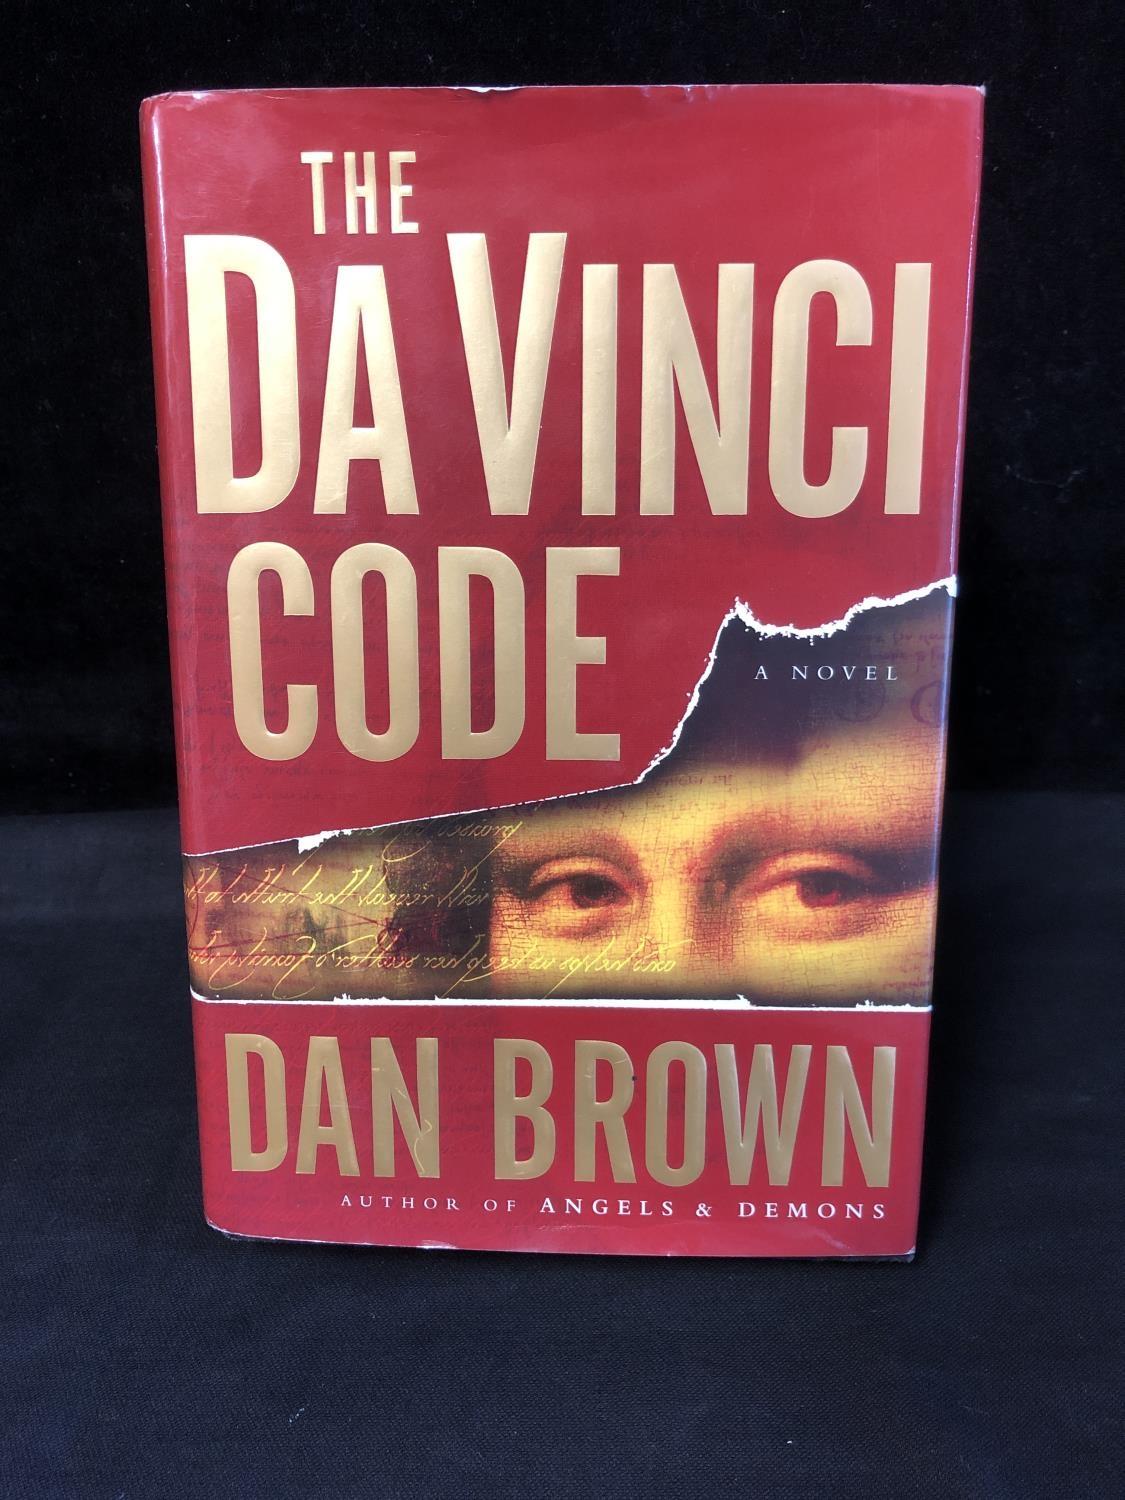 WITHDRAWN - Book - Dan Brown - The Da Vinci Code, First Edition/printing, published by Doubleday 2